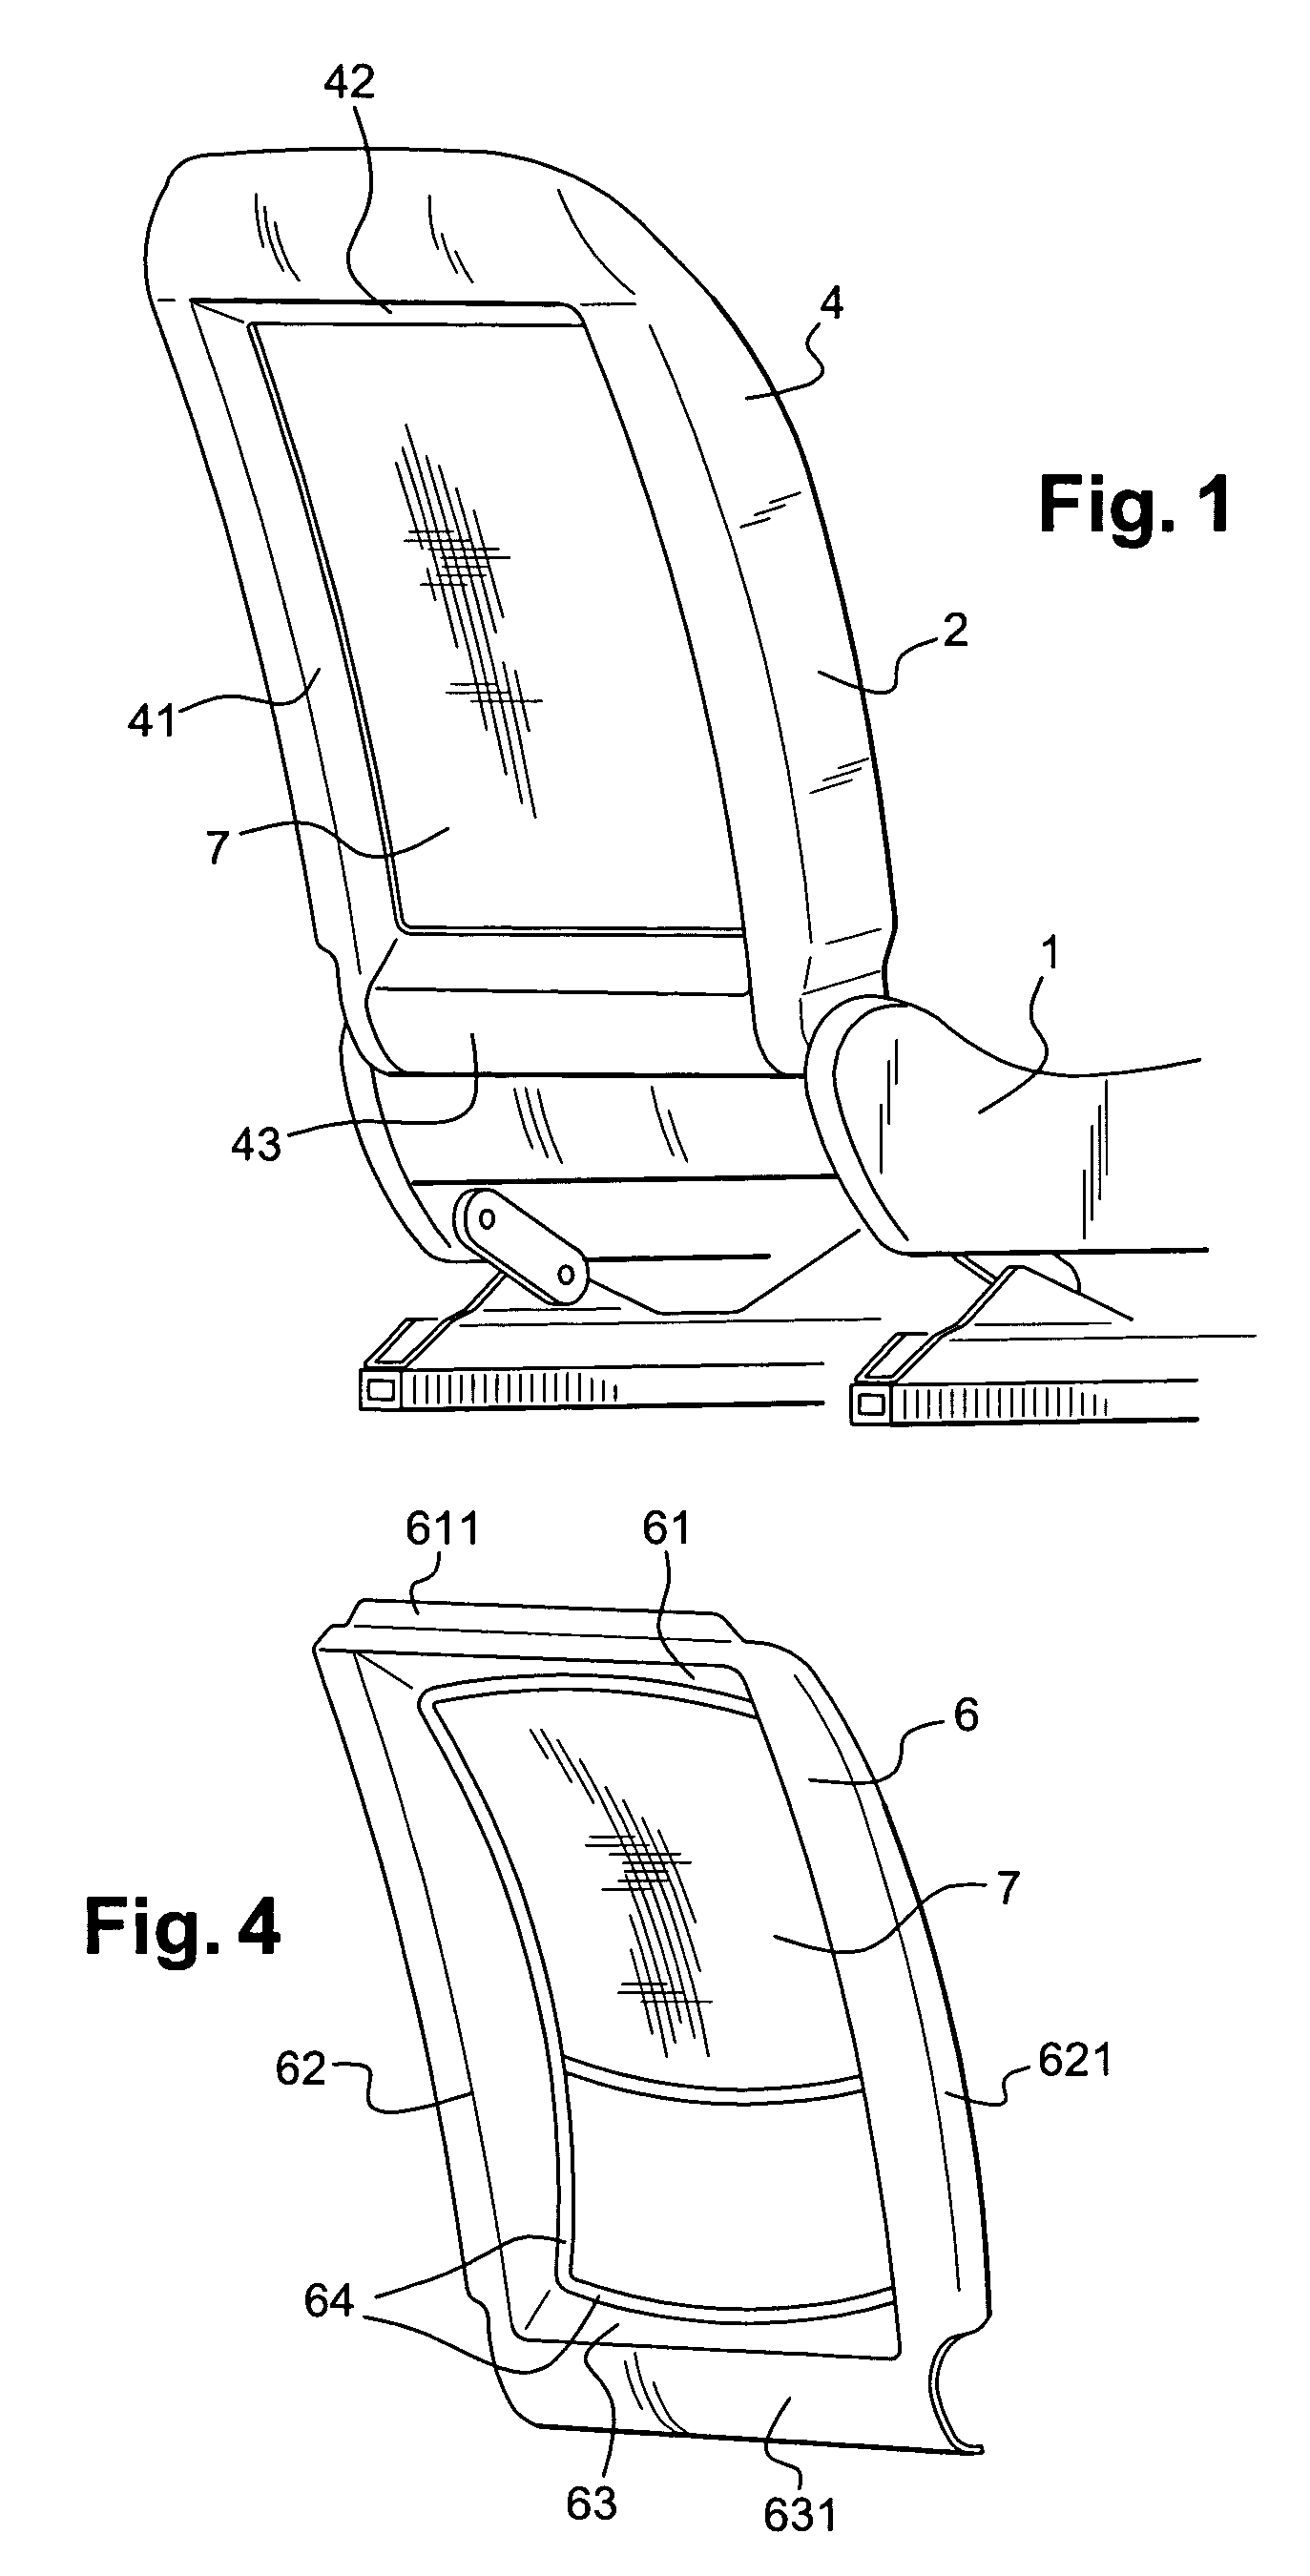 Backrest of an automobile vehicle seat